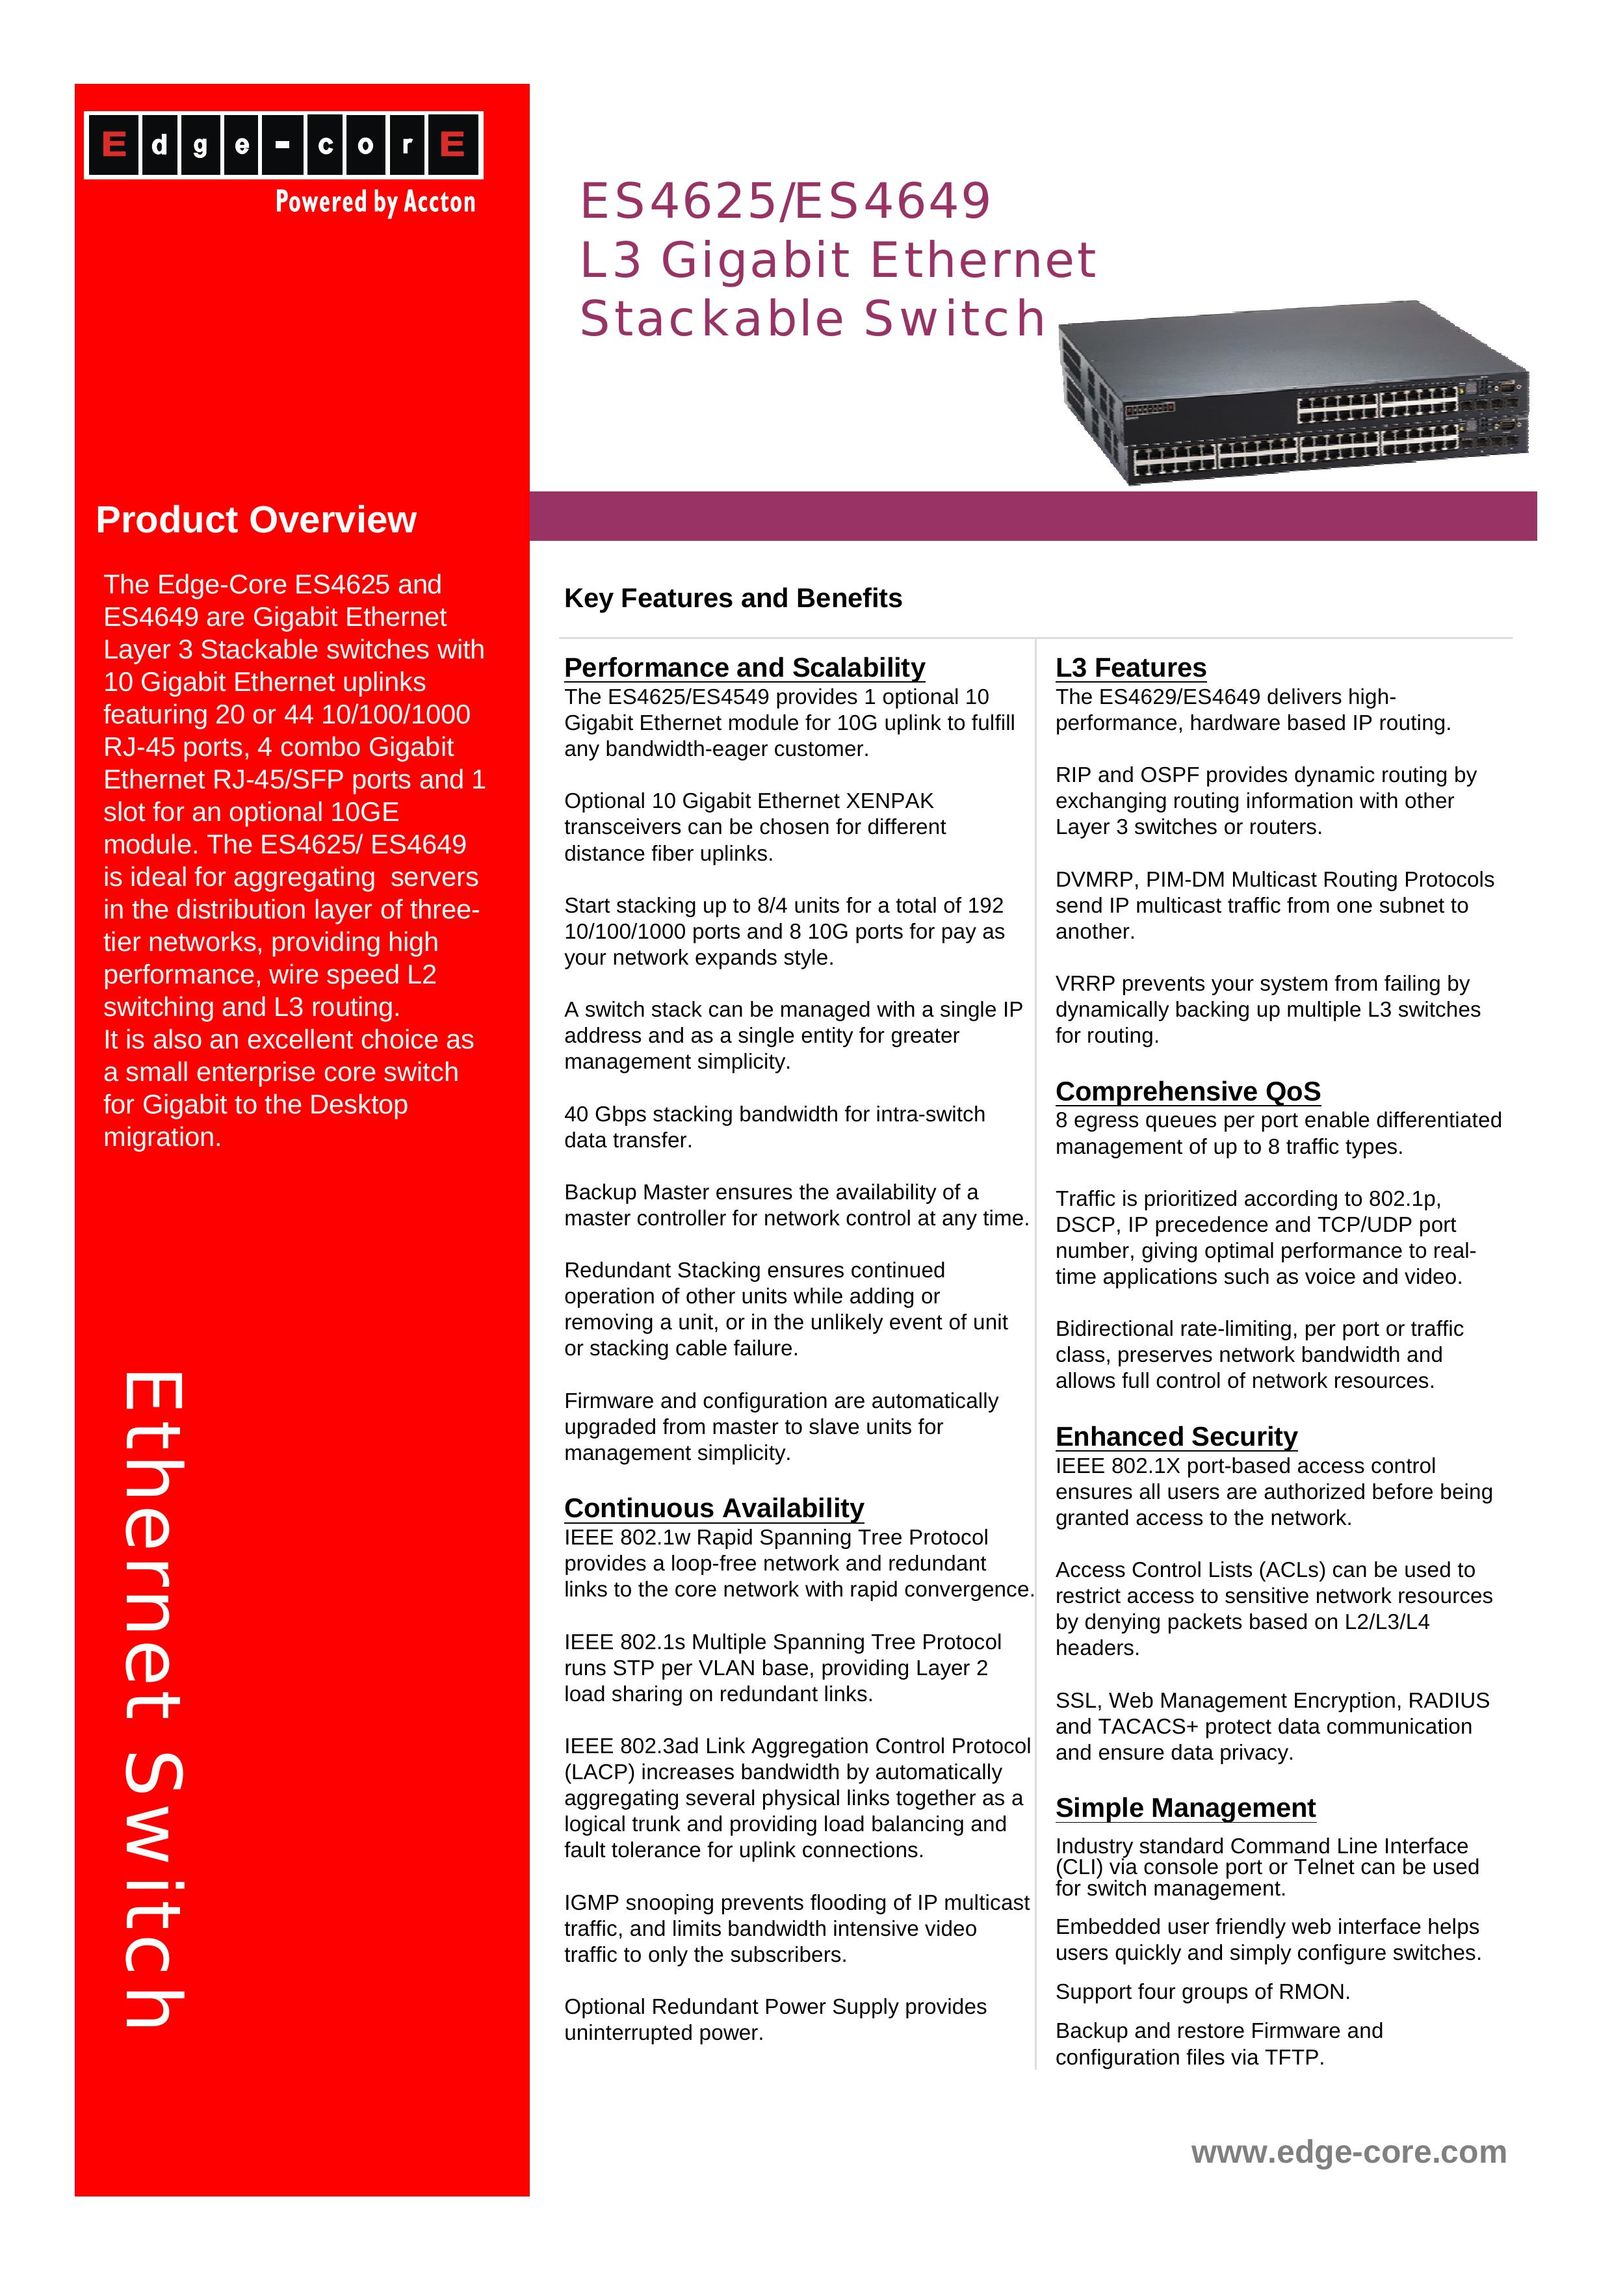 Alloy Computer Products ES4649 Switch User Manual